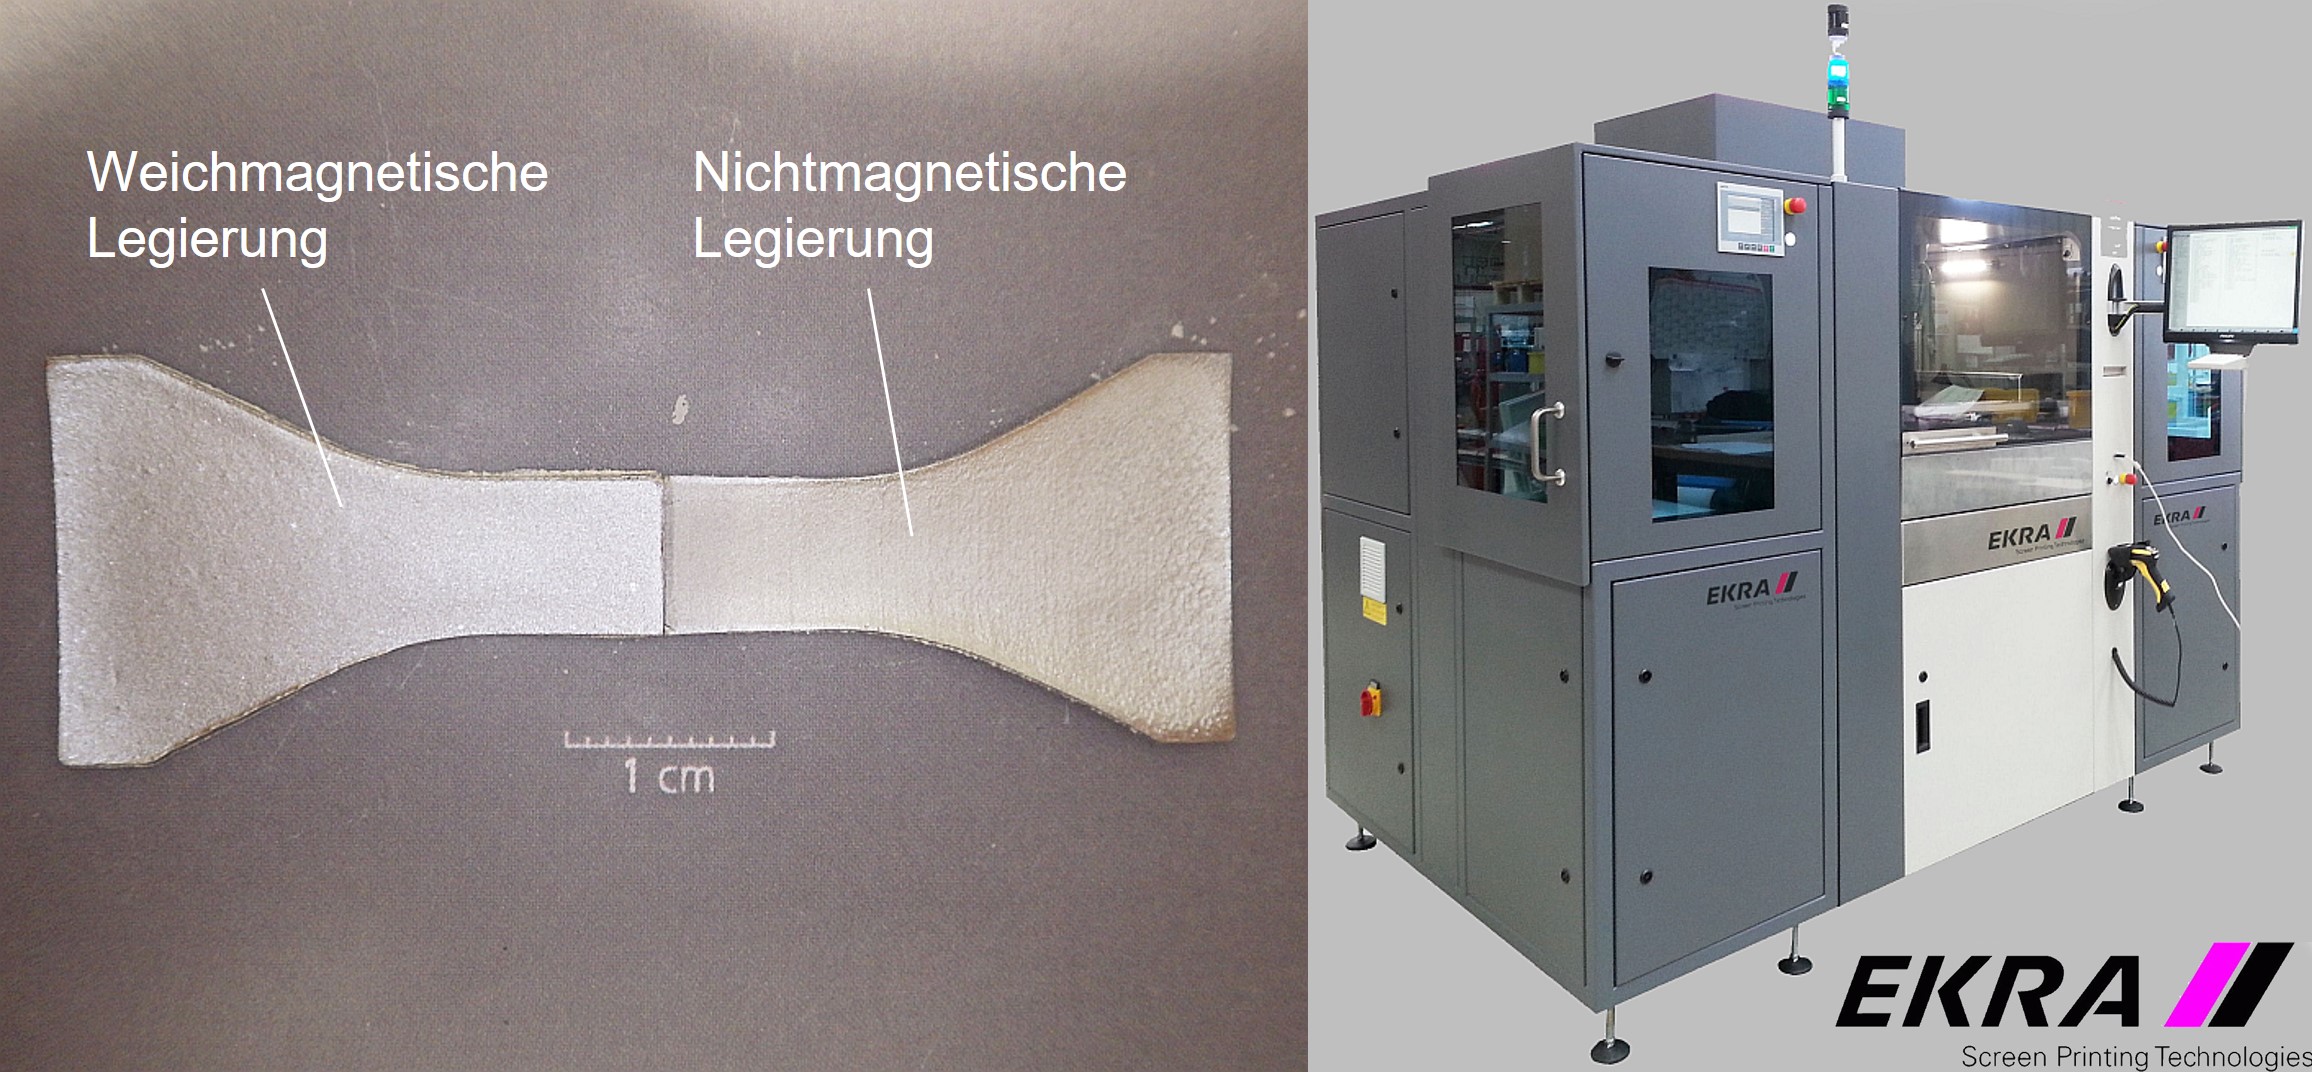 Test structure of a hybrid material produced by screen printing, consisting of a soft magnetic alloy and a non-magnetic alloy (left). Screen printing facility of EKRA Automatisierungstechnik GmbH at Fraunhofer IFAM Dresden, which was used to produce the hybrid structures (right).